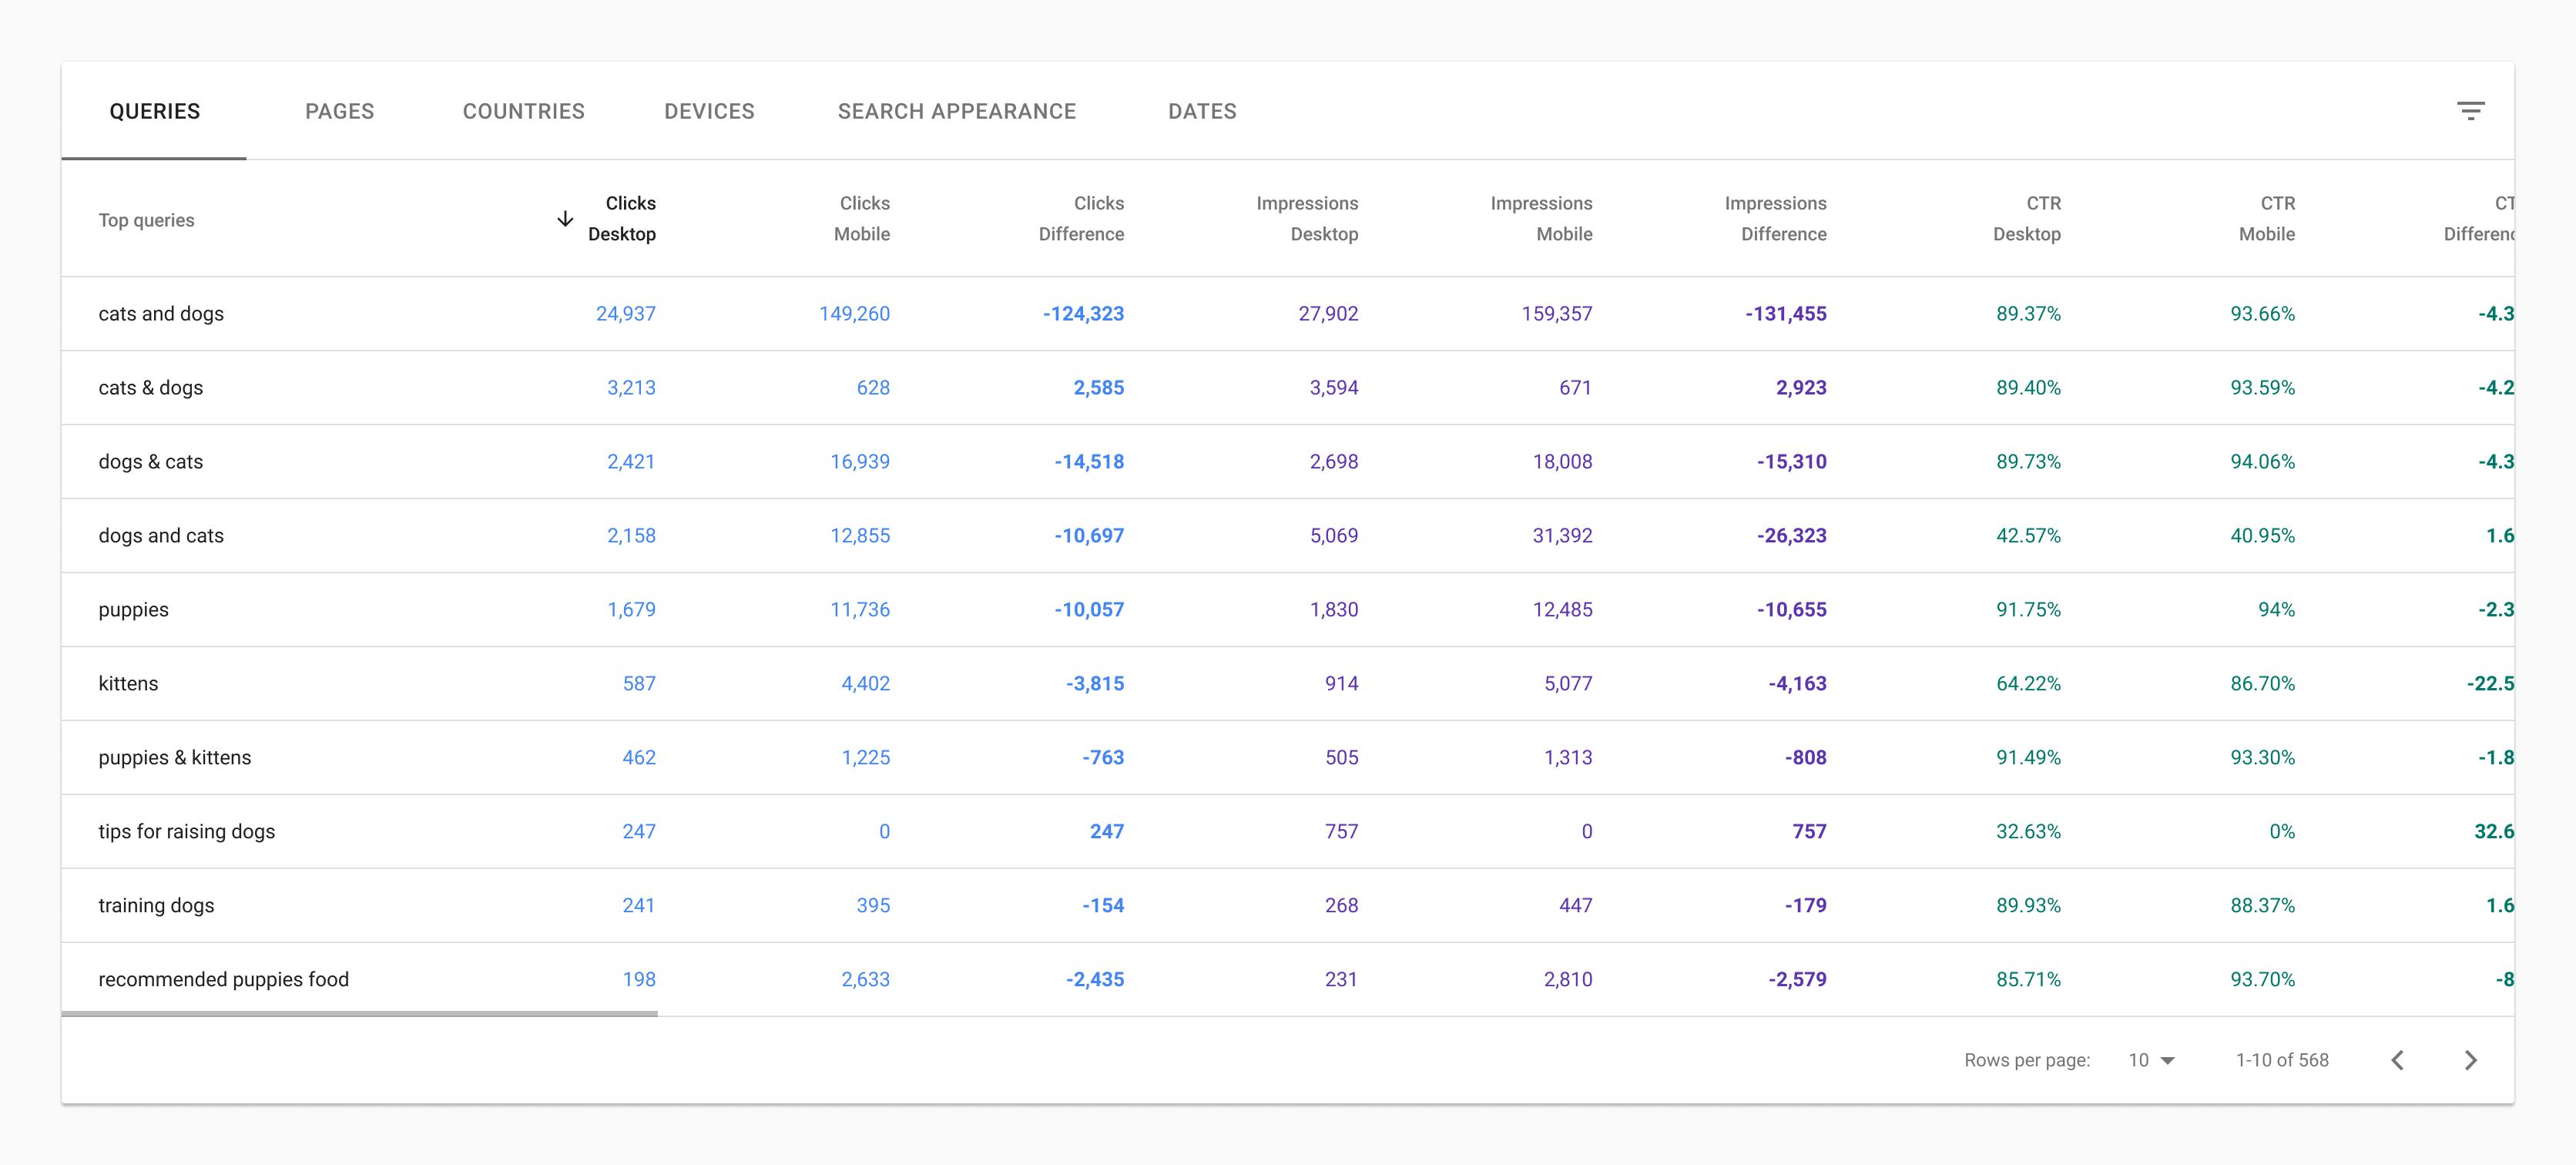 Google Launches 2 Improvements to Search Console Reports